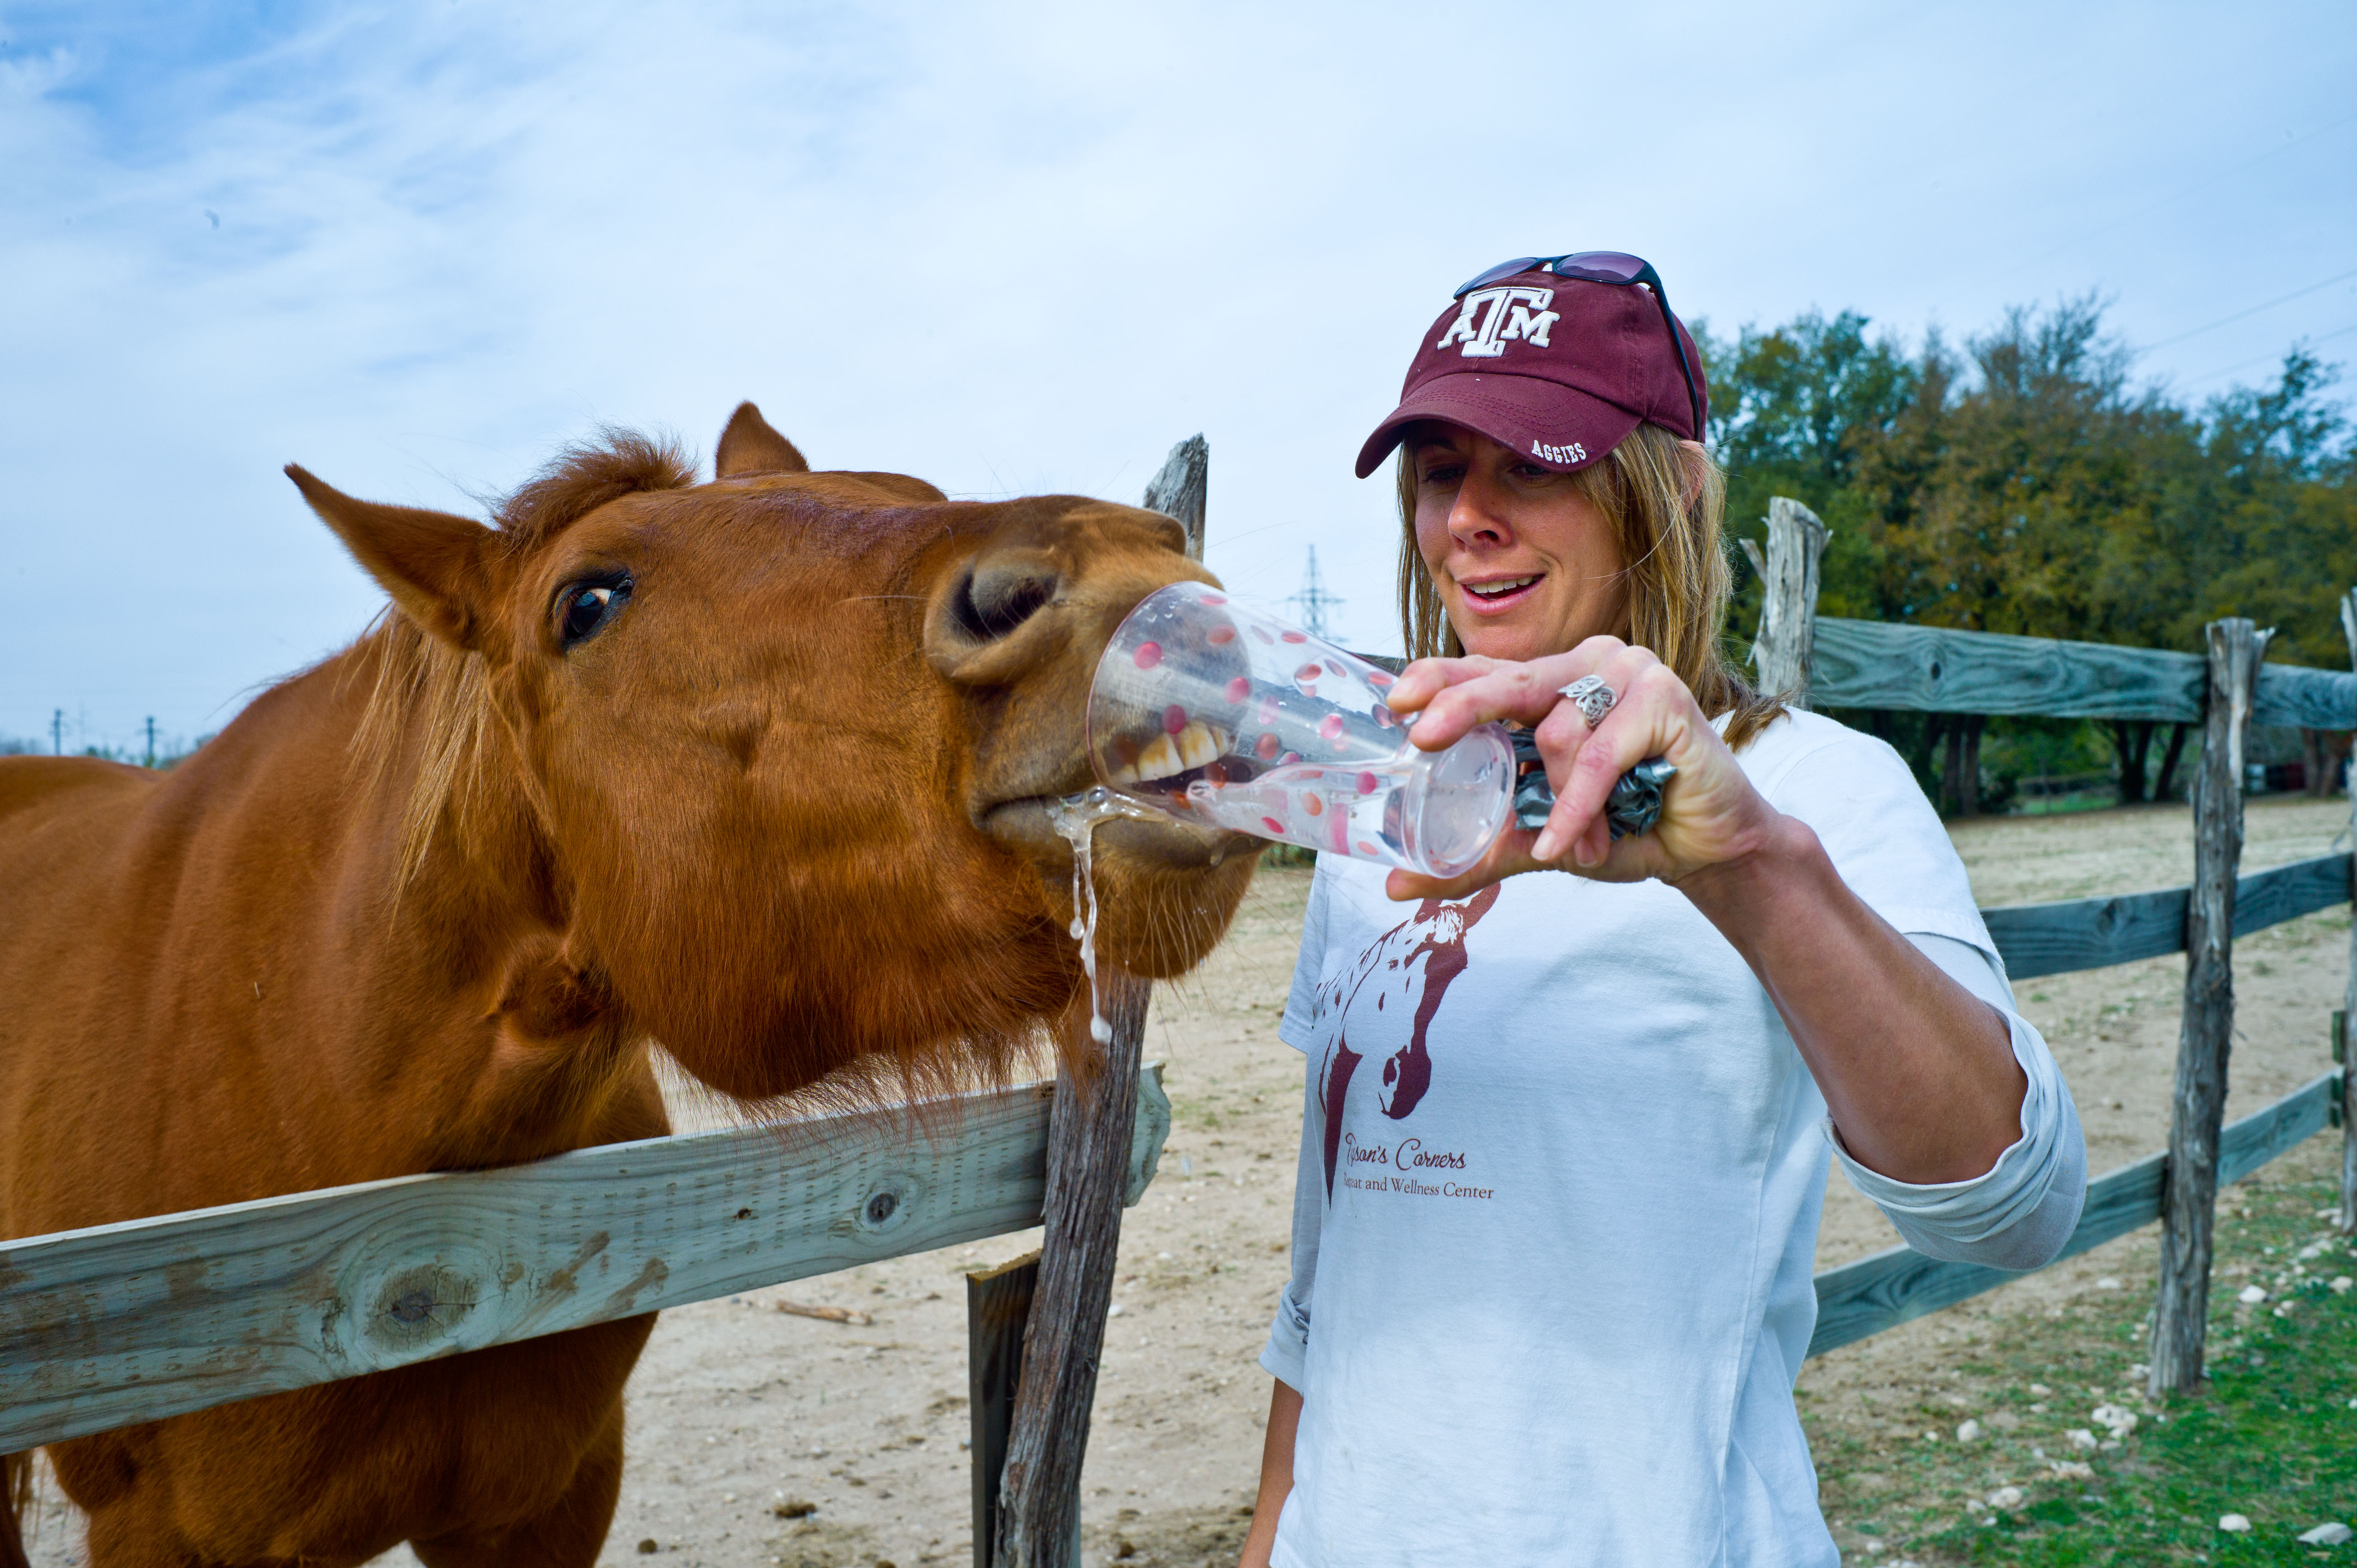 Joanna Tyson, an equine specialist, shares a glass of water with her friend “PJ” during a single Soldier retreat held March 1-3 at Tyson’s Corner Retreat and Wellness Center in Lampasas, TX. (Photo by Staff Sgt. Michael J. Dator, 85th Civil Affairs Brigade Public Affairs)